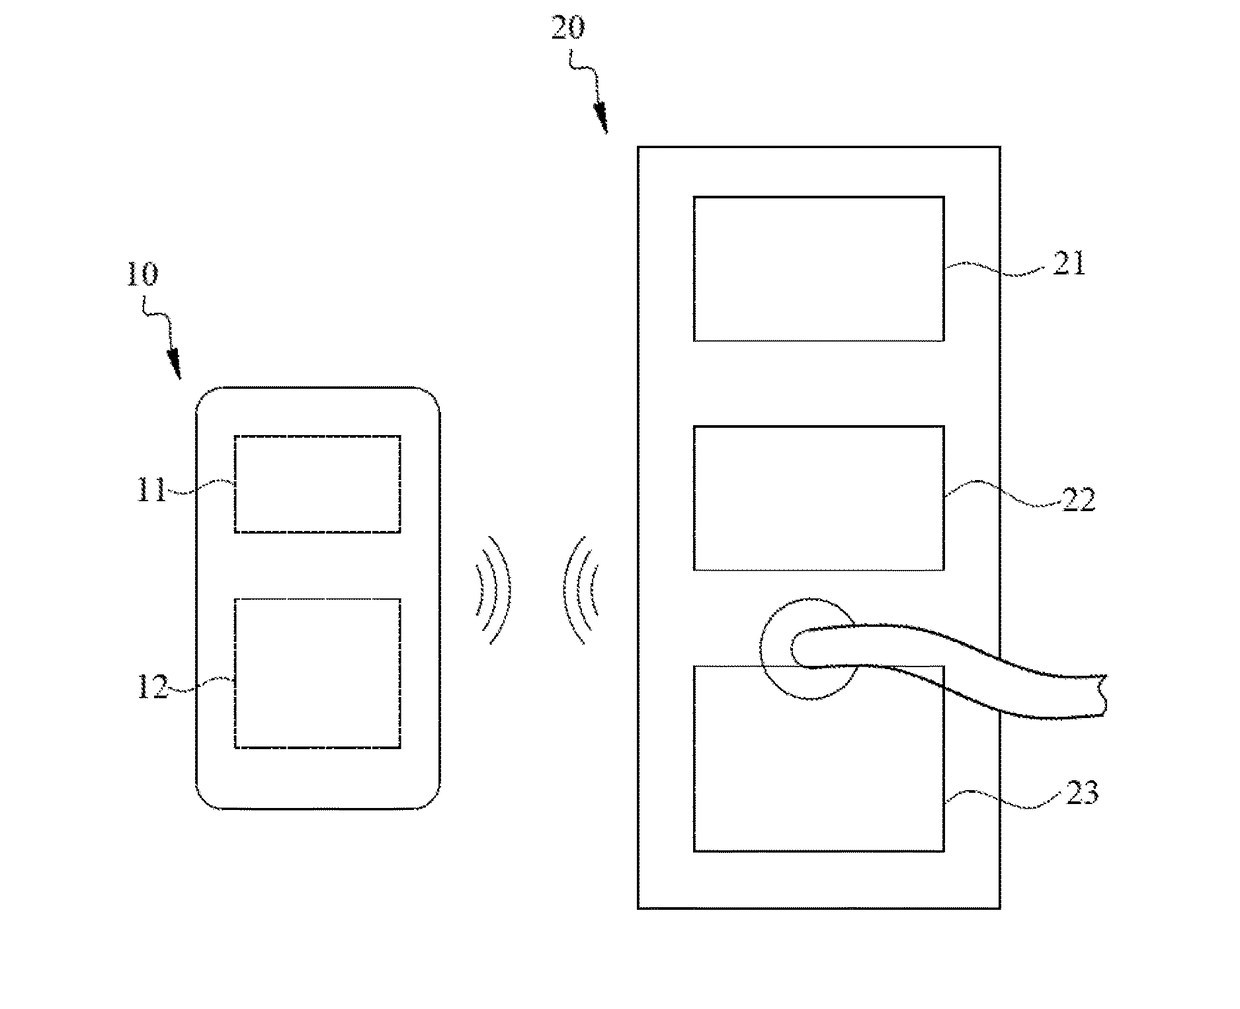 Electric lock adapted to be activated by a mobile phone and method thereof